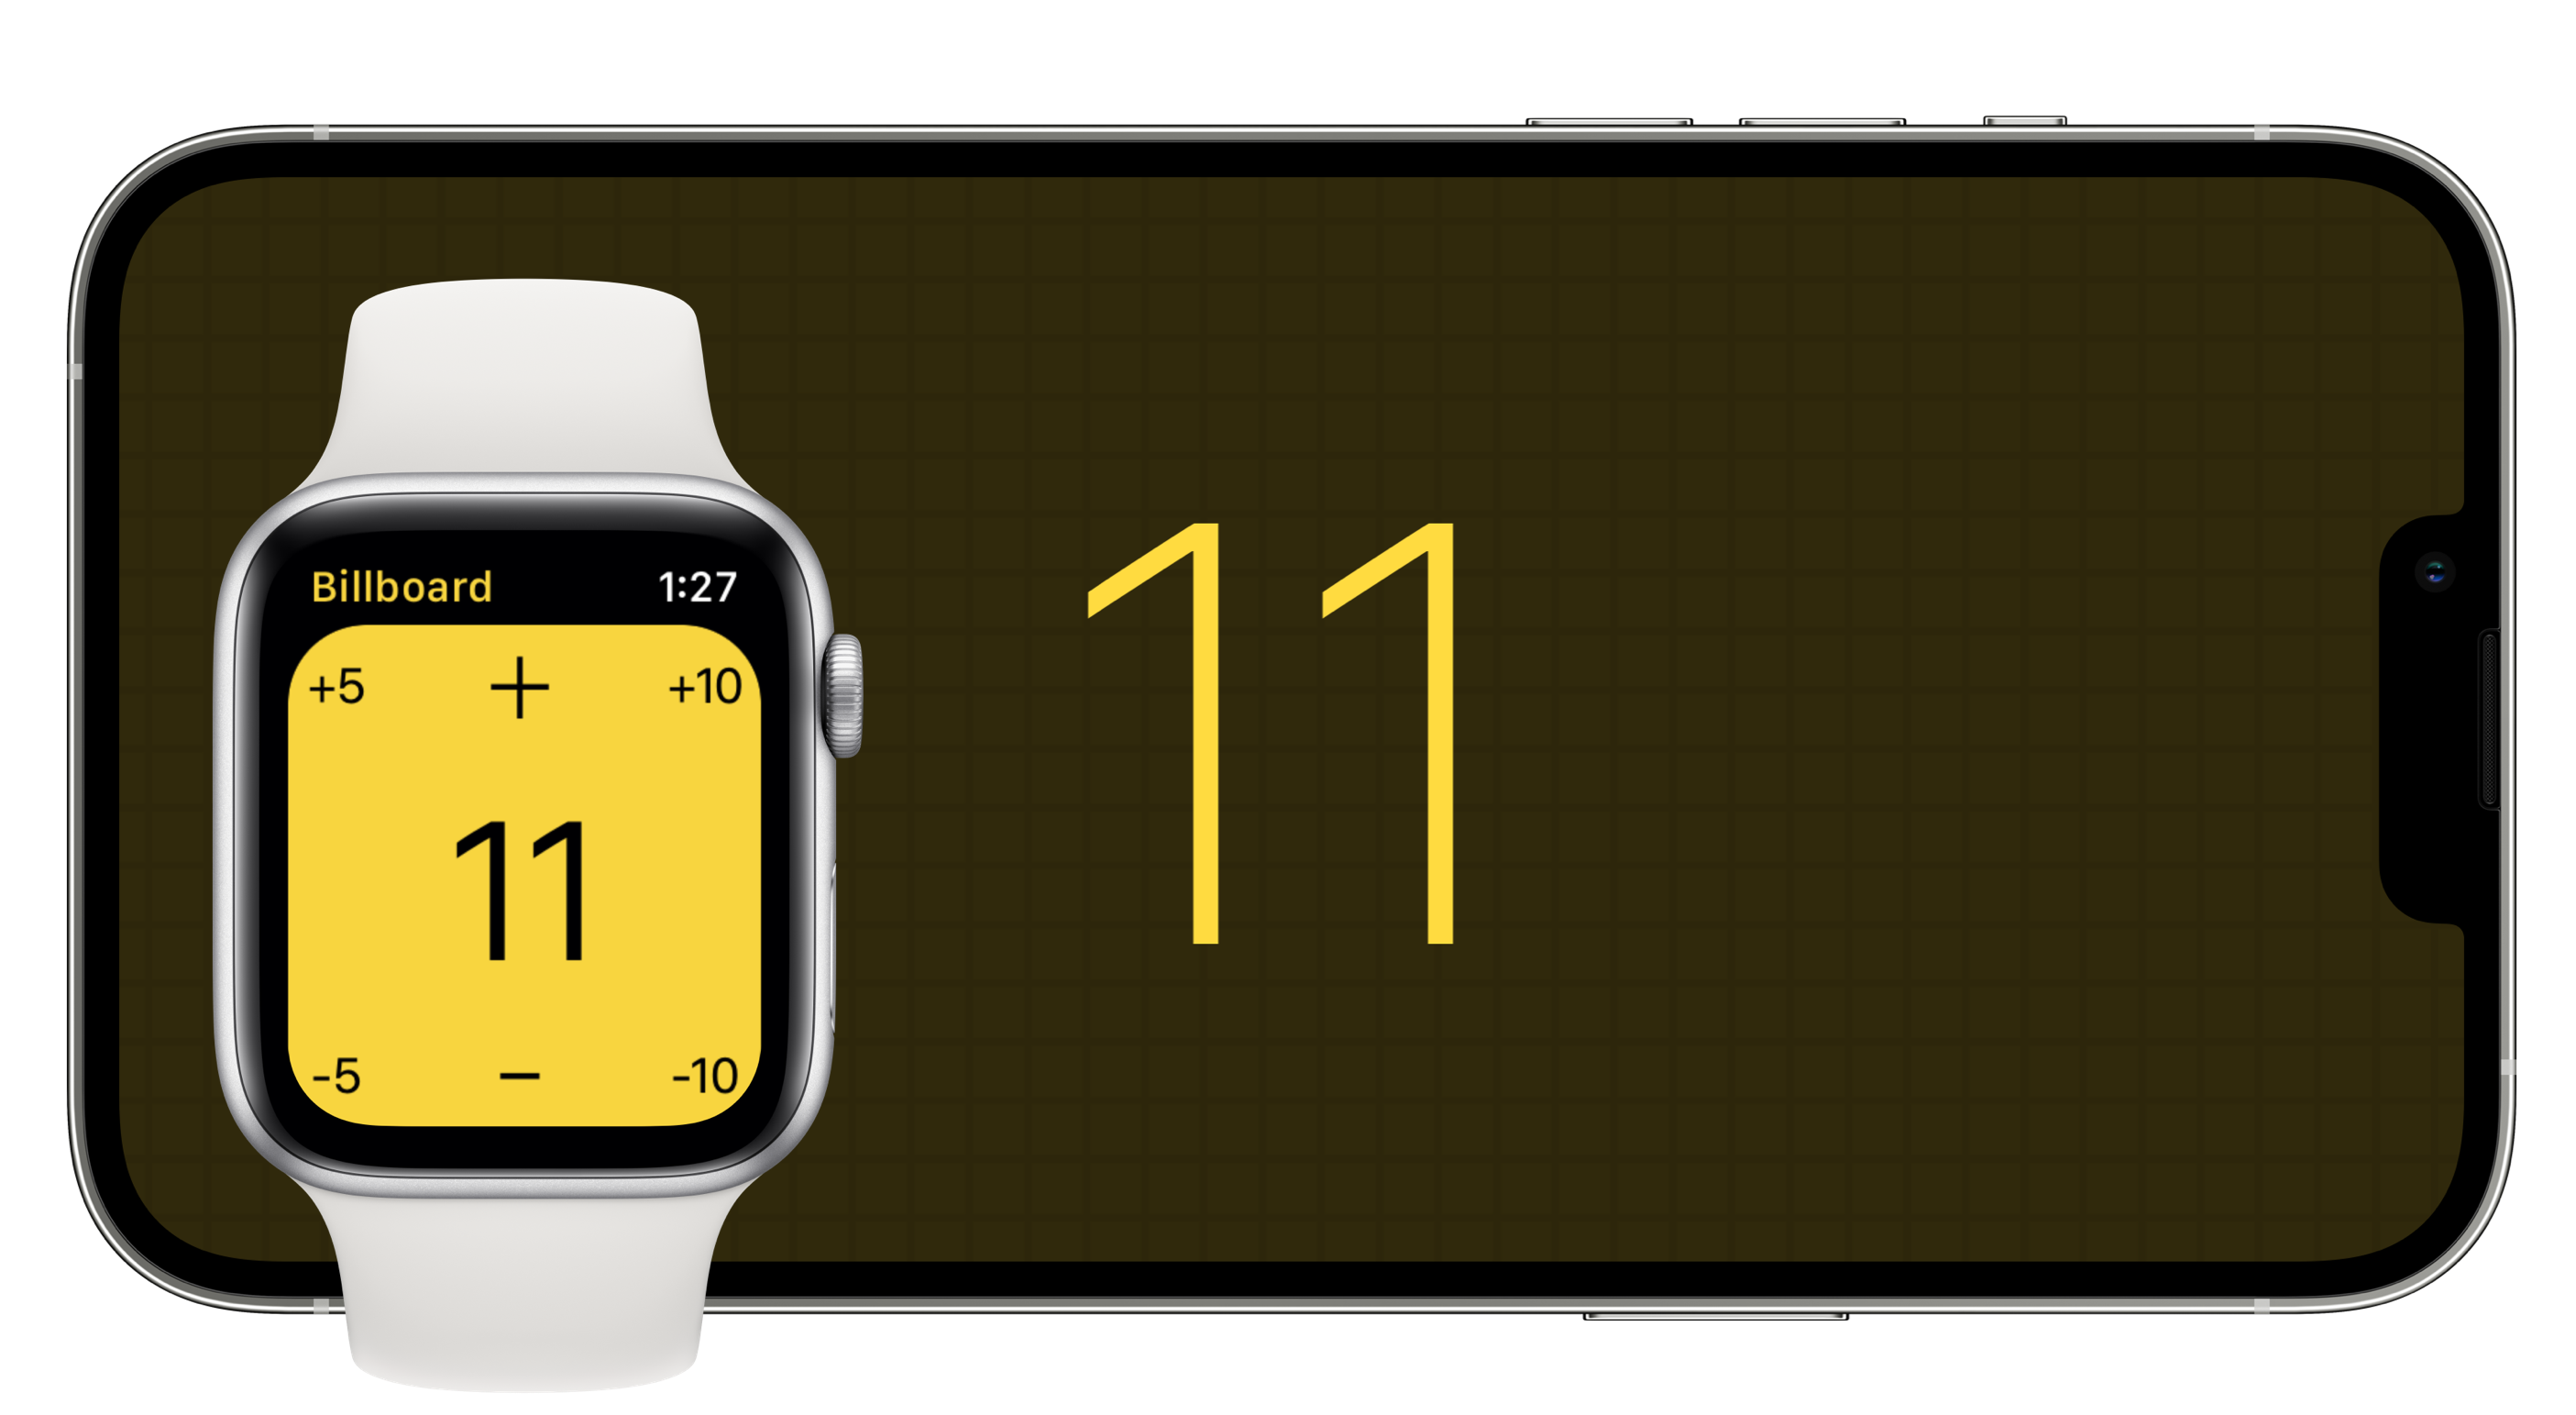 Tally on iPhone and Tally on Apple Watch connected via Billboard Mode, and displaying the same count.